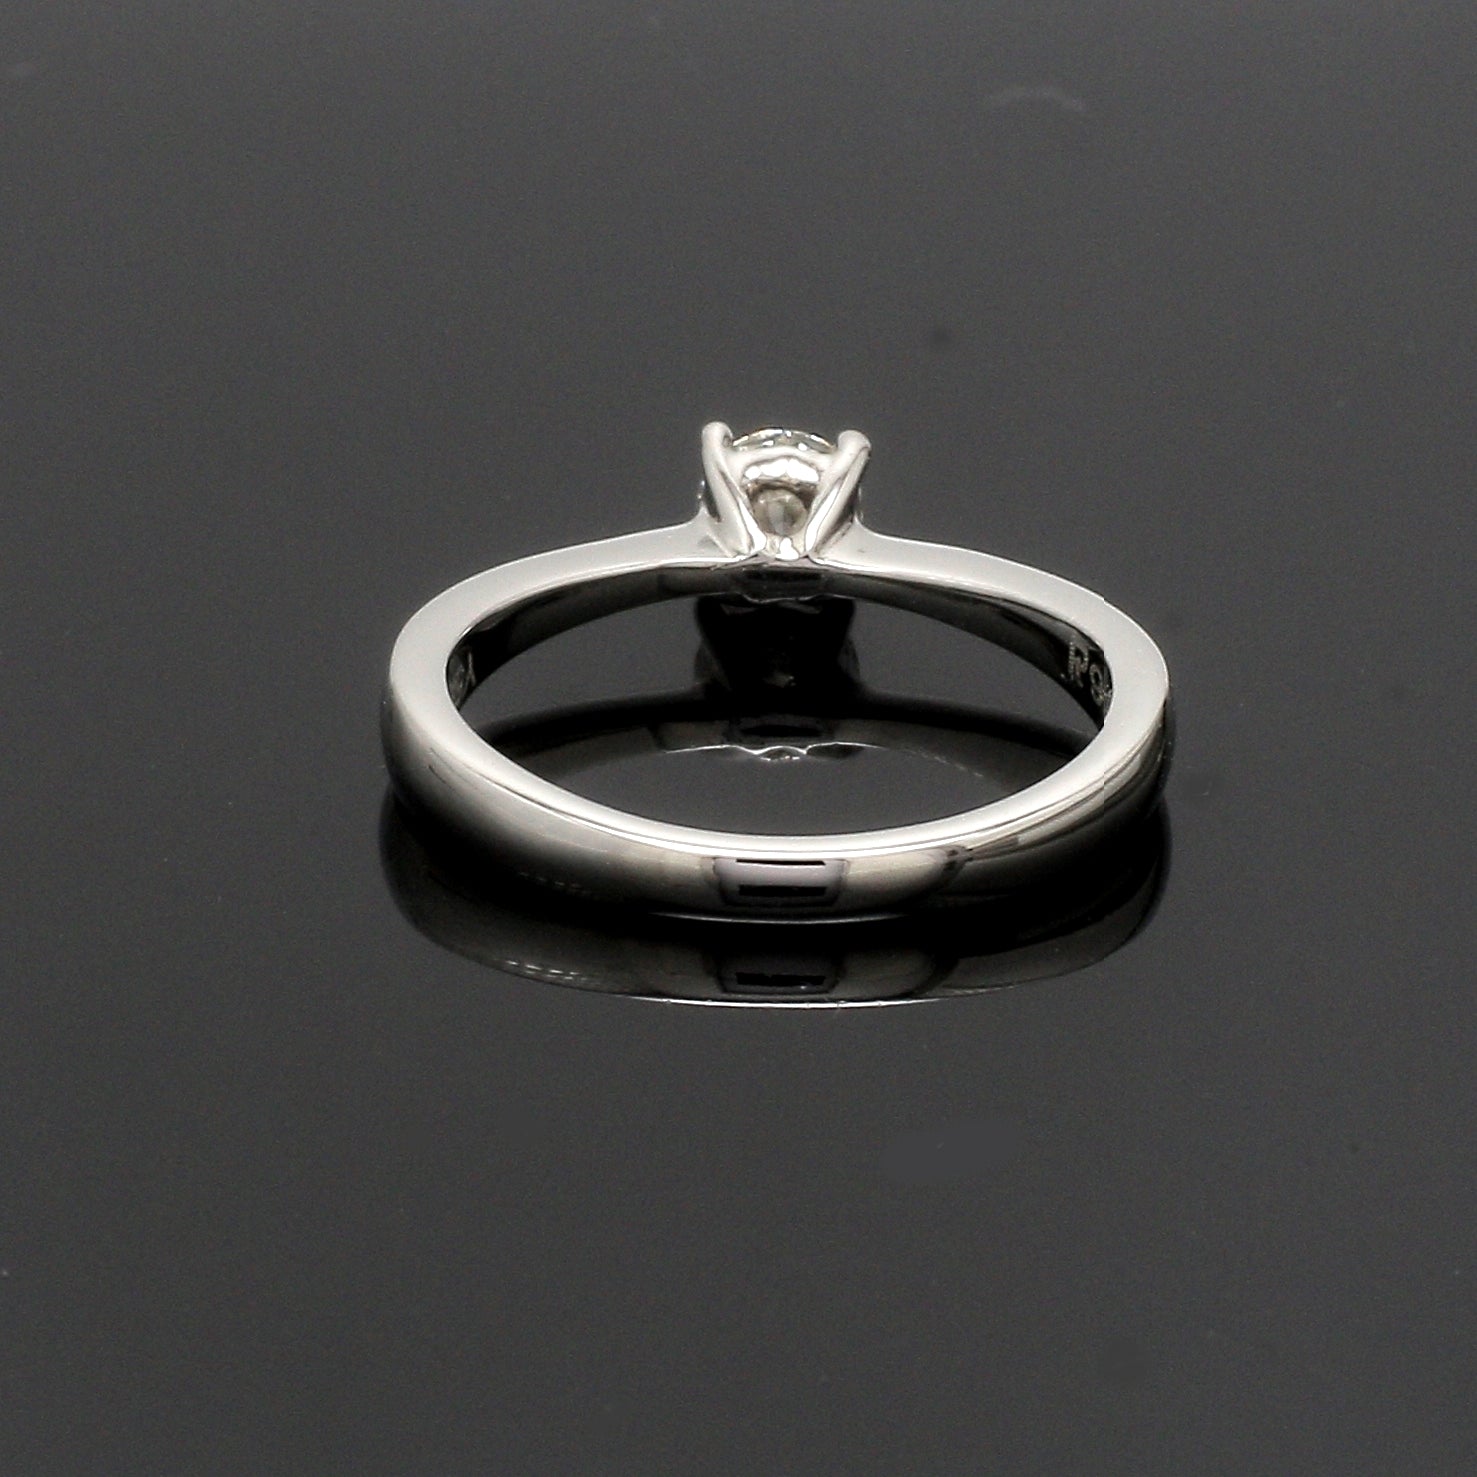 0.30 cts Solitaire Platinum Ring JL PT RS RD 117   Jewelove.US